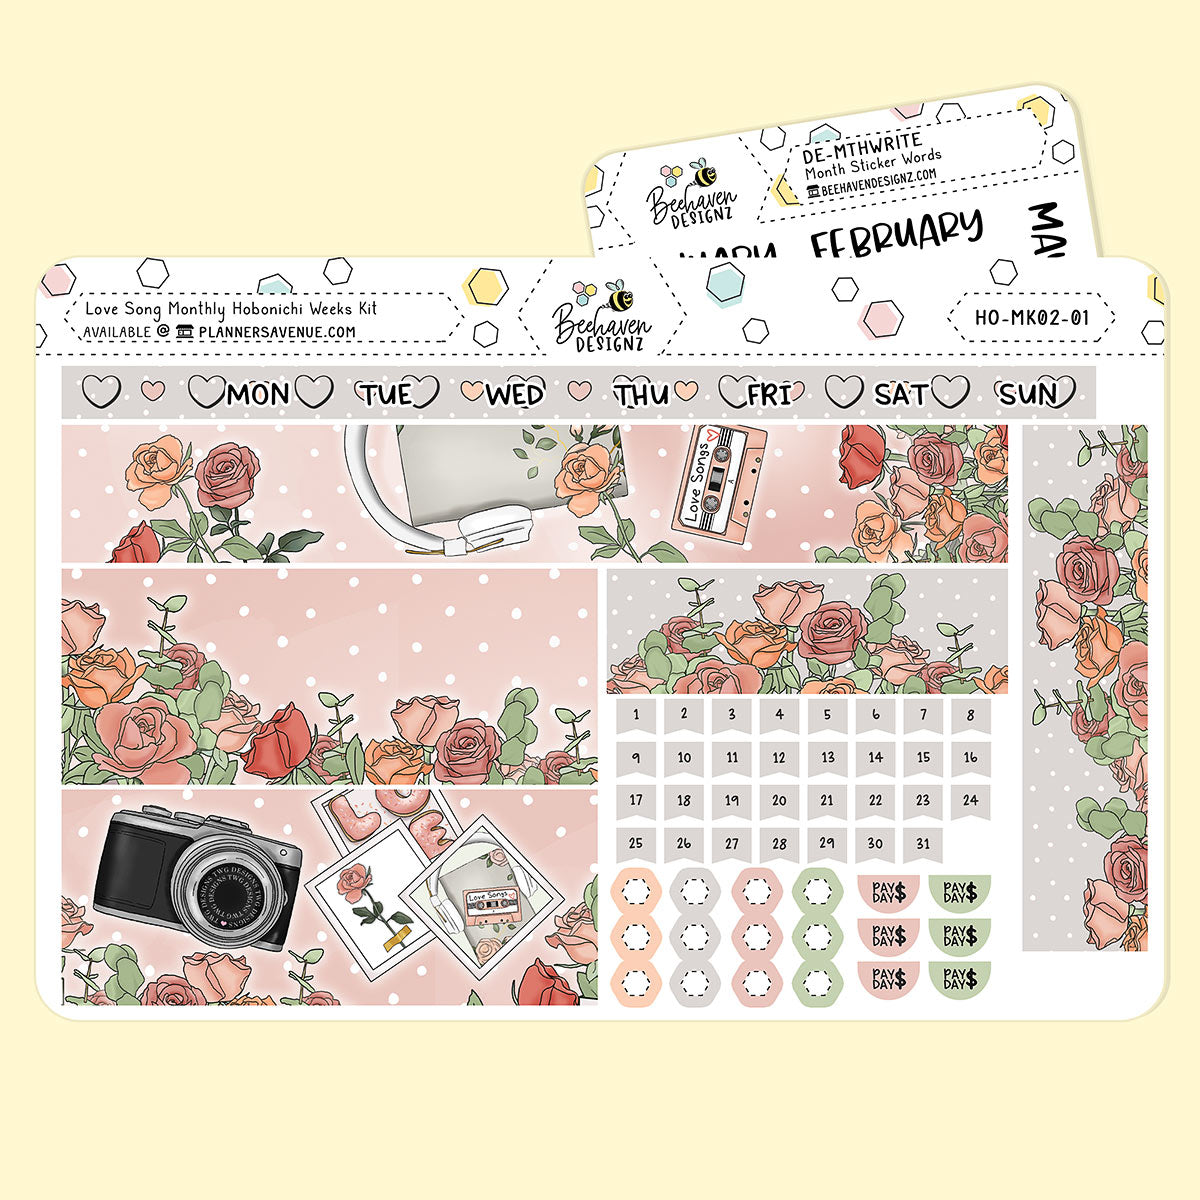 Love Song Hobonichi Monthly Kit